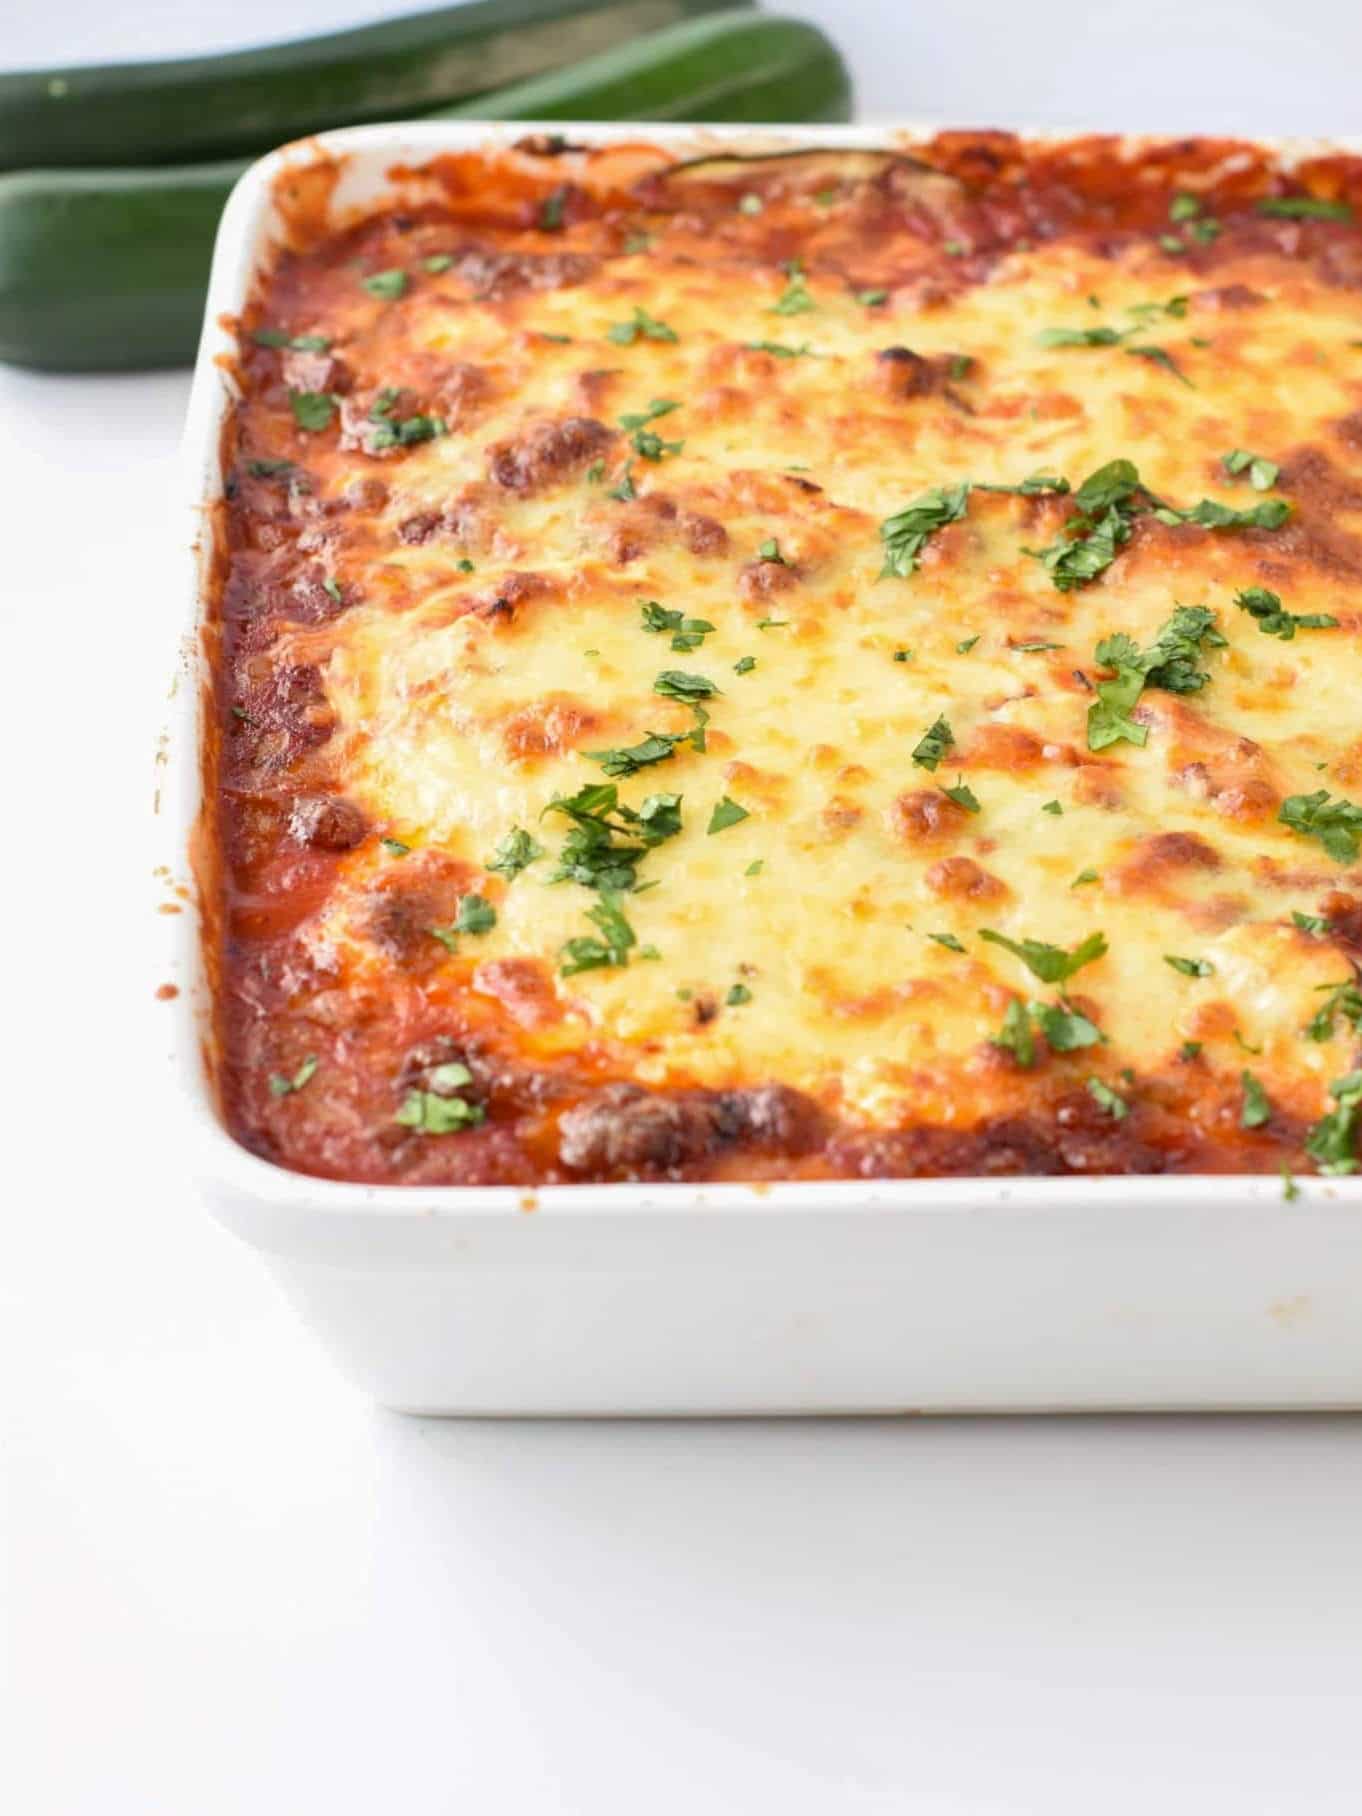 Keto Zucchini Lasagna in their cooking pan in front of fresh zucchini.